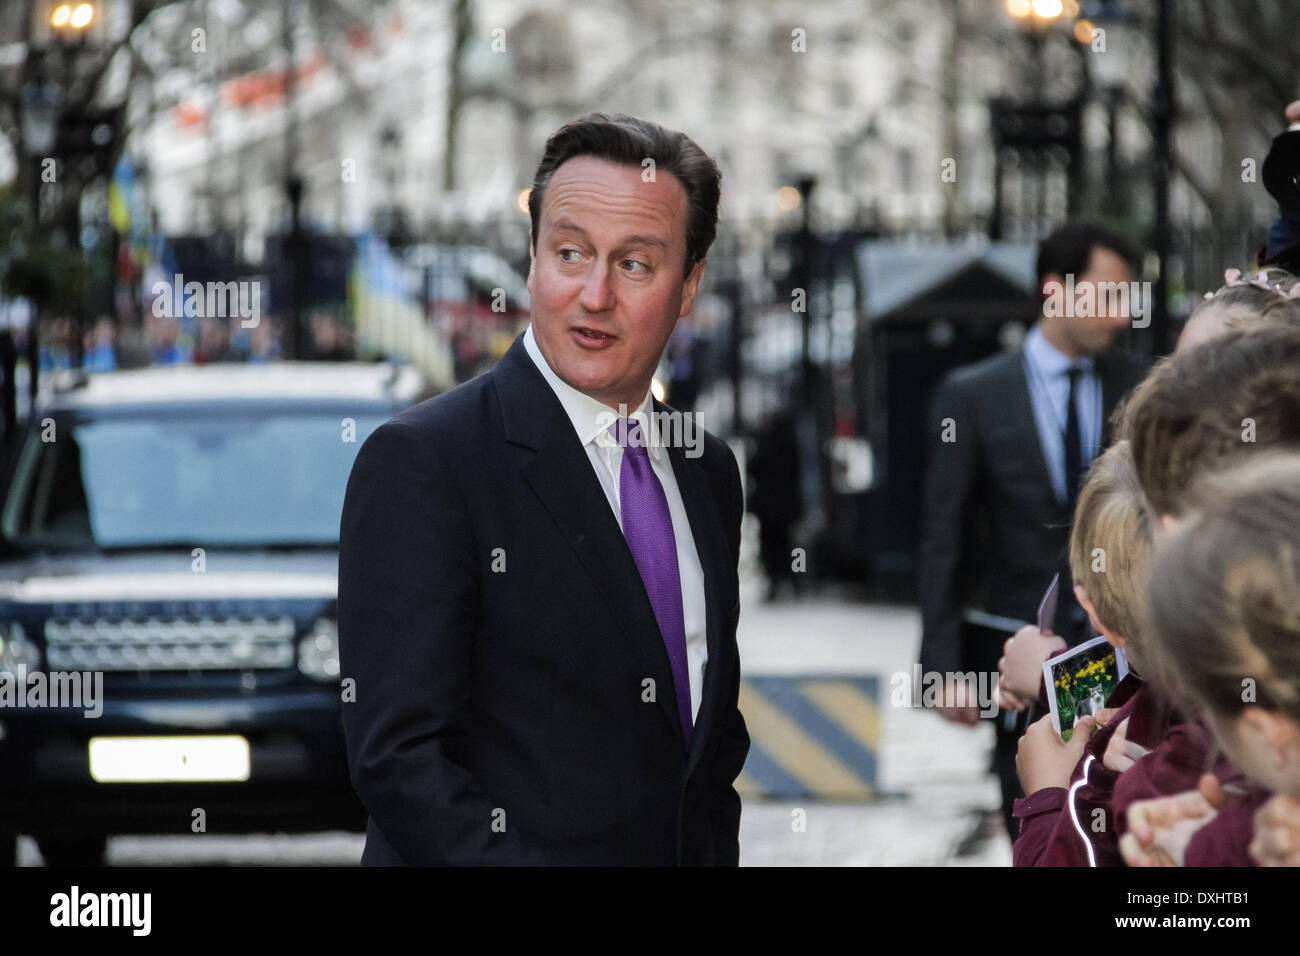 London, UK. 26th March 2014. British Prime Minister David Cameron outside Downing Street meeting with local visiting school children before a meeting with Ukrainian UDAR party MP Vitali Klitschko. Credit:  Guy Corbishley/Alamy Live News Stock Photo